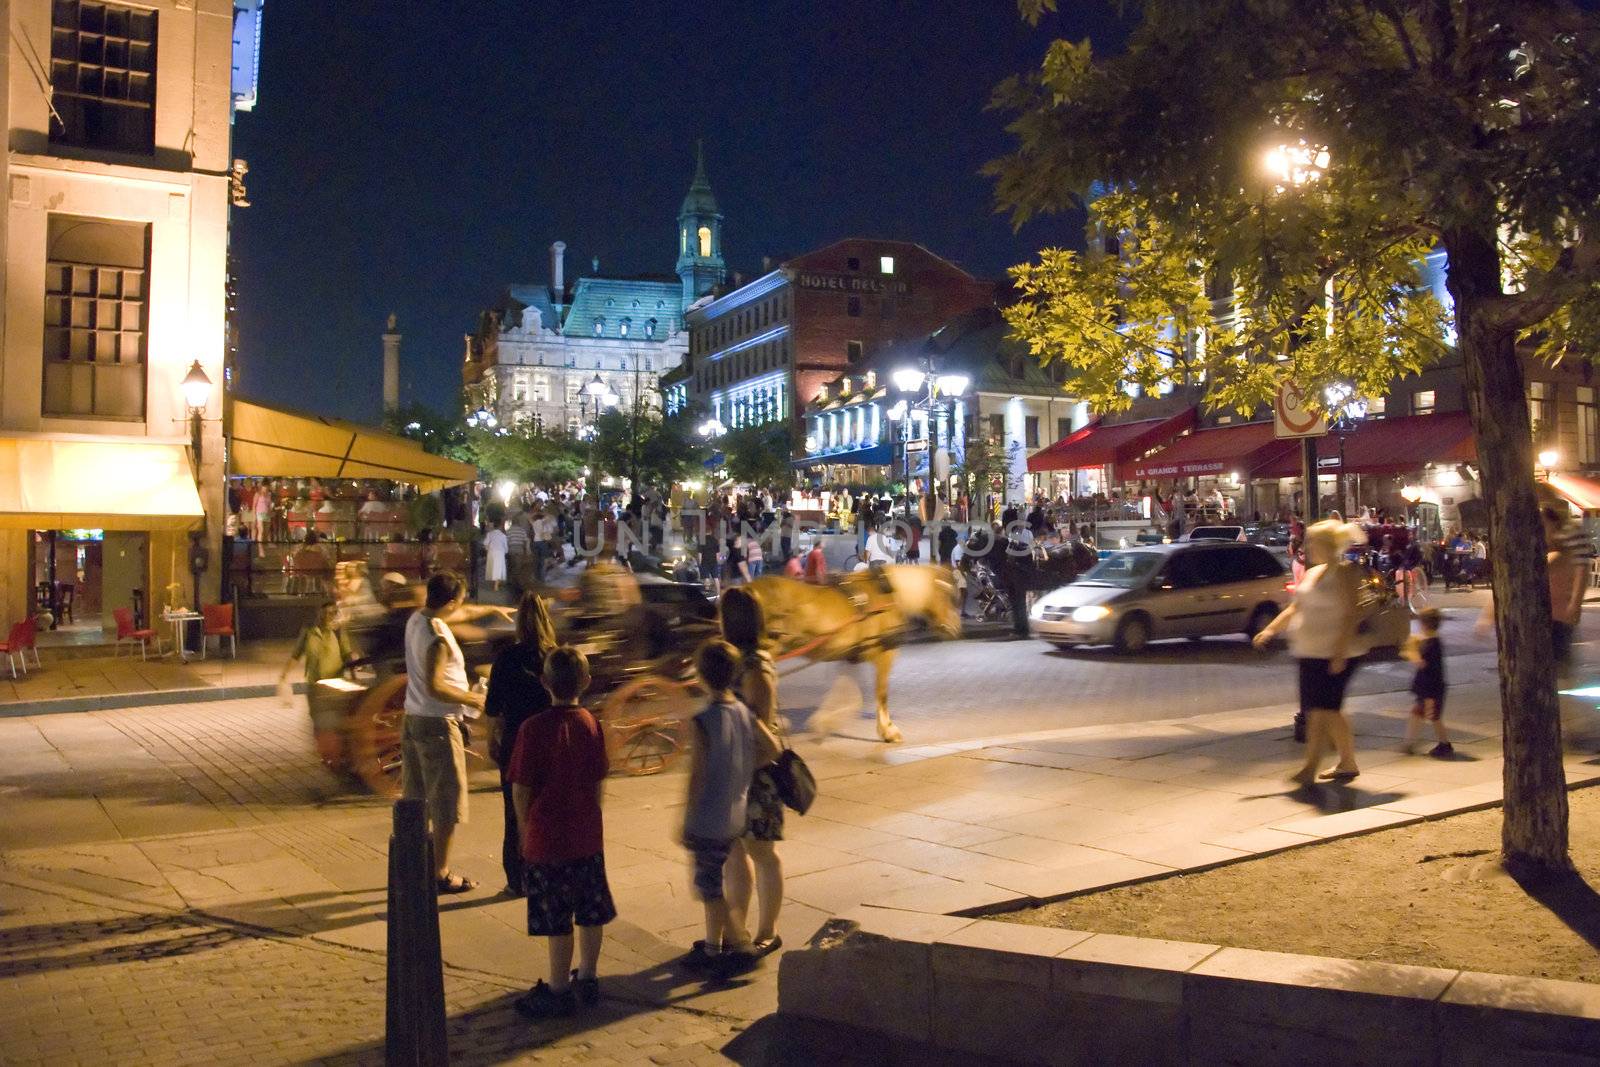 Night scenery on a typical Montreal summer